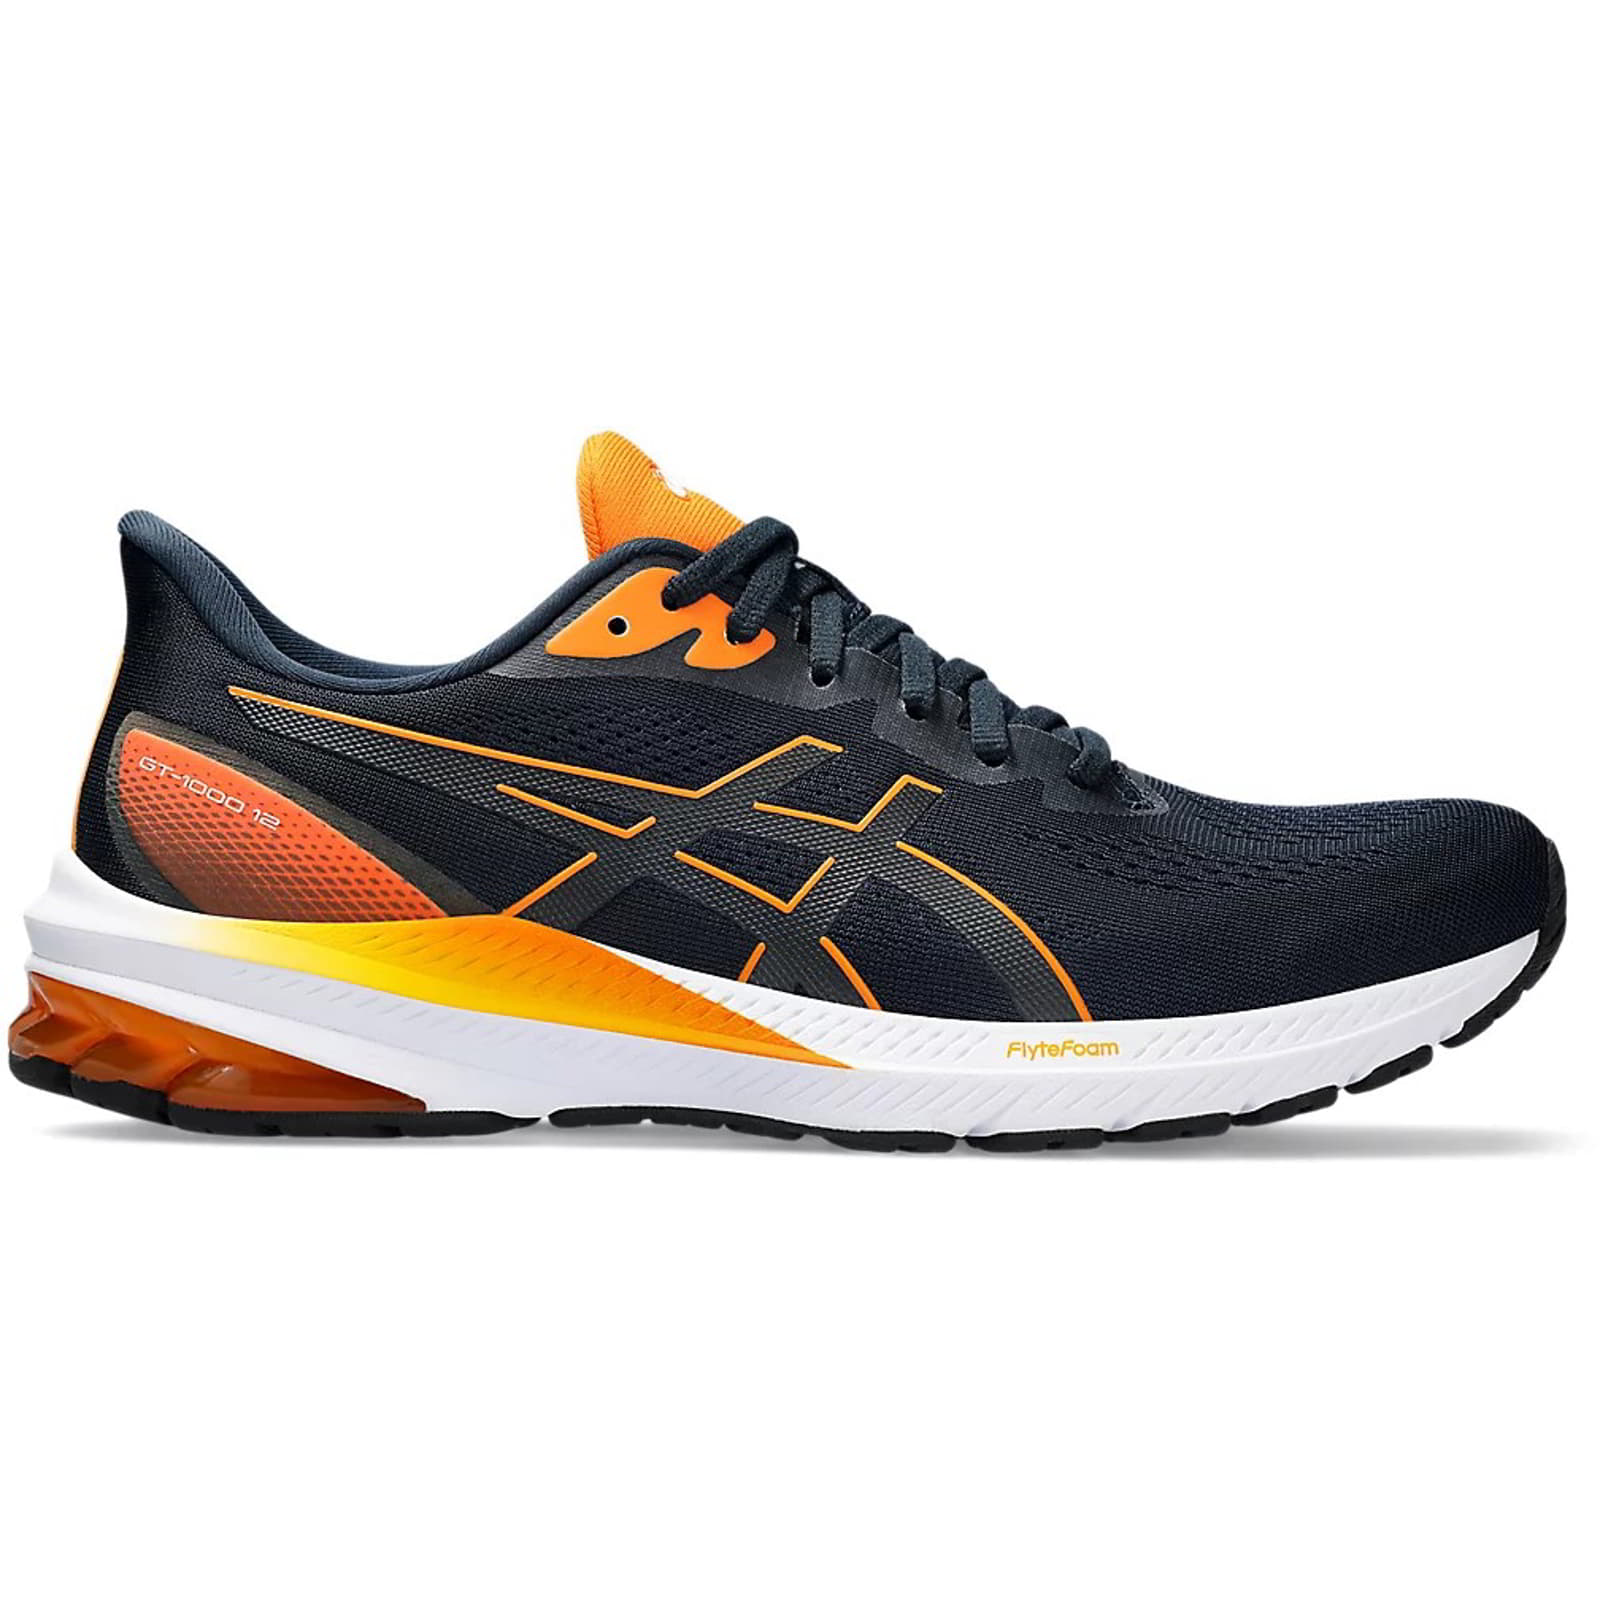 Asics Men's GT-1000 12 Running Shoes Trainers - UK 12